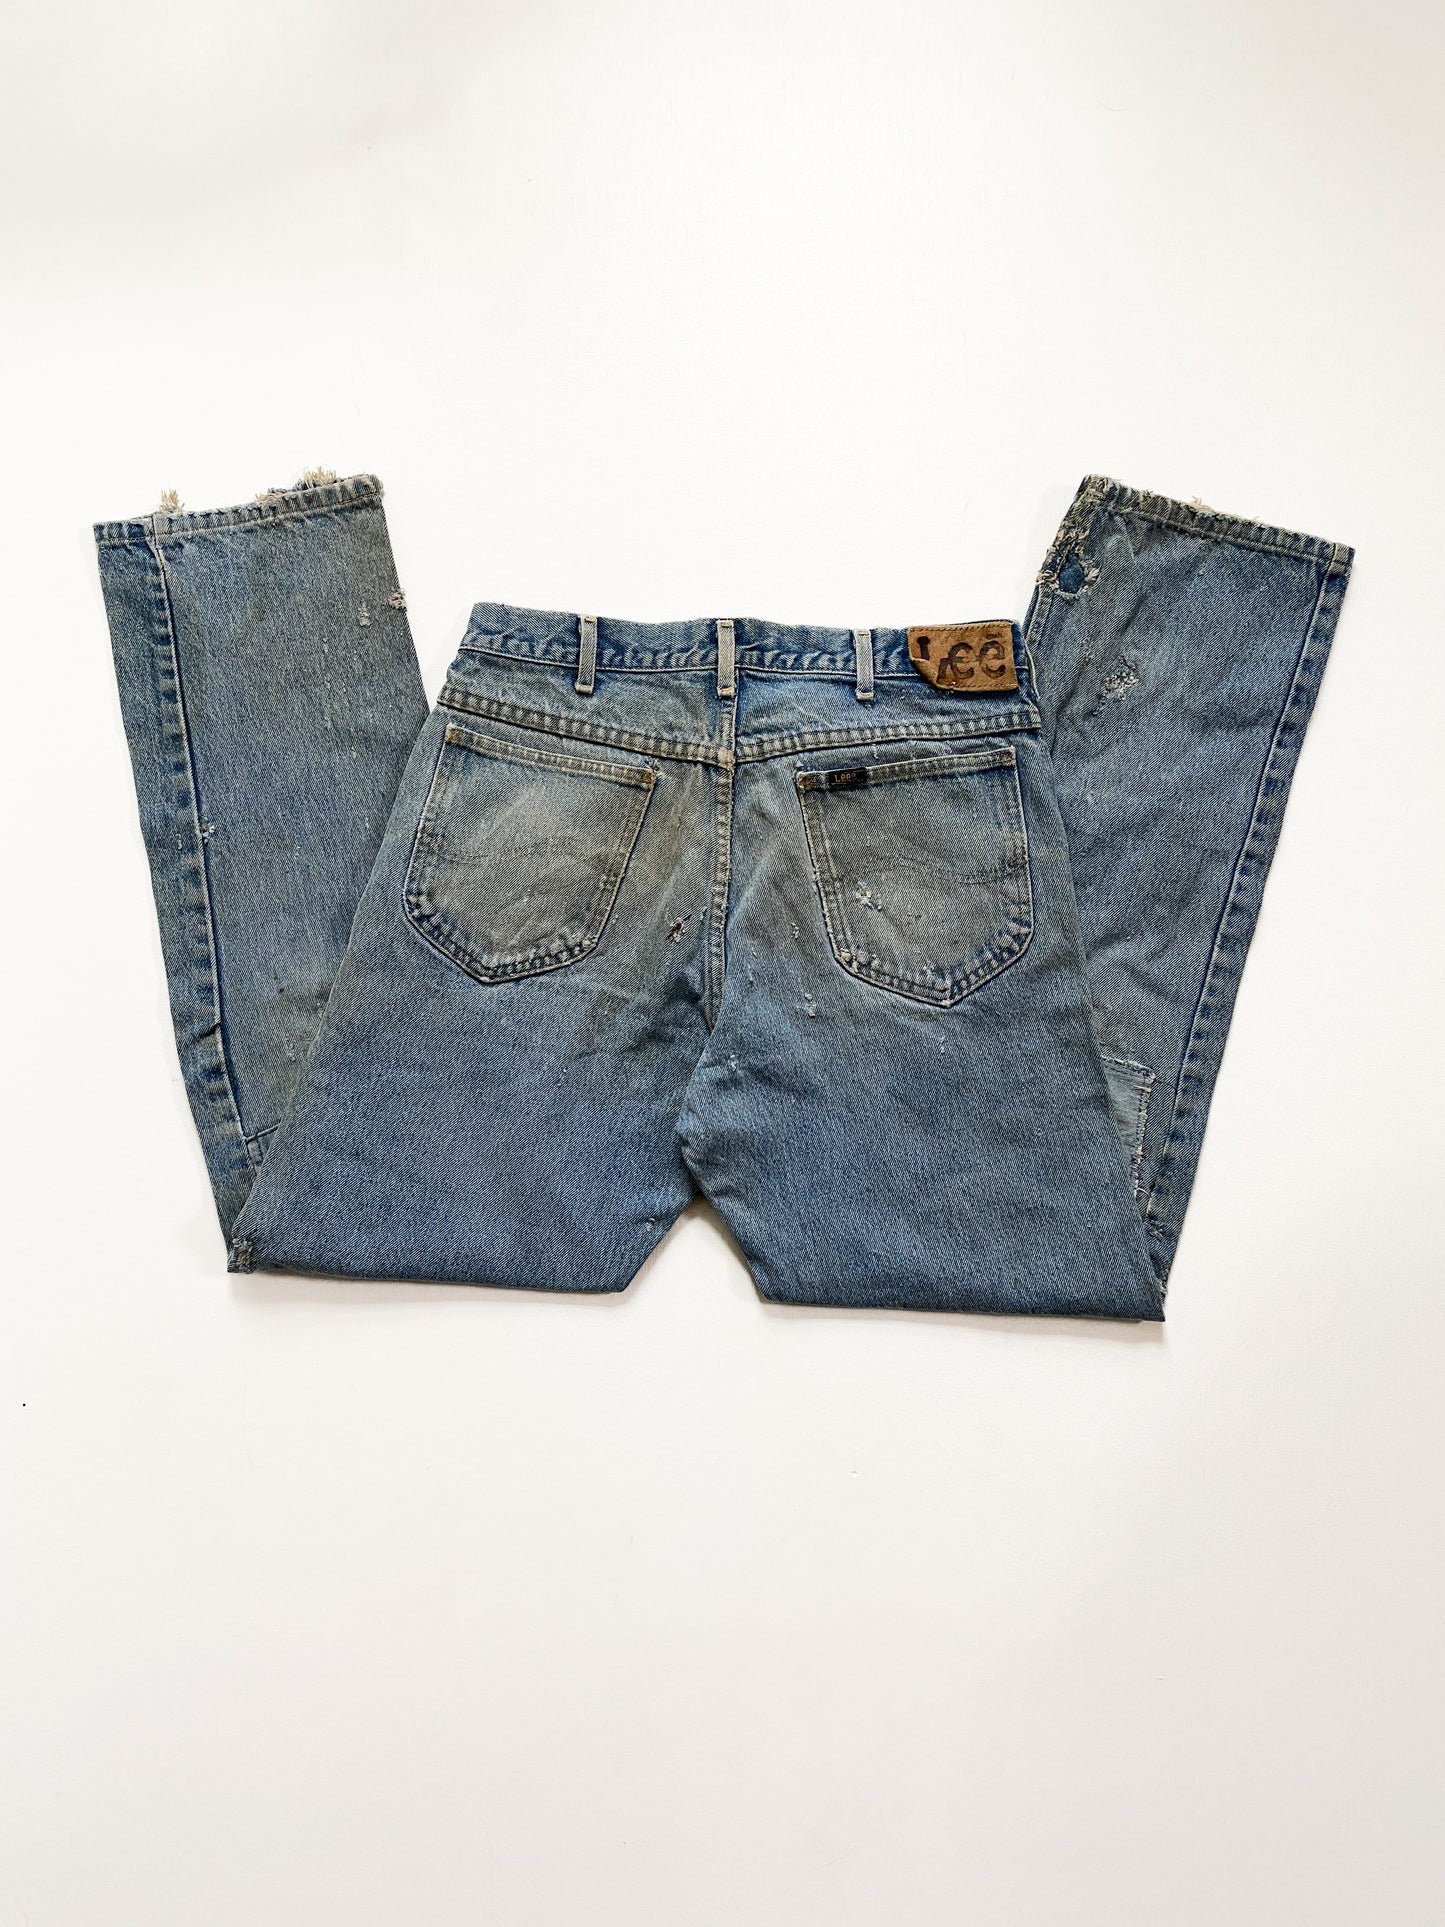 1970’s Lee 101 Rider Jeans